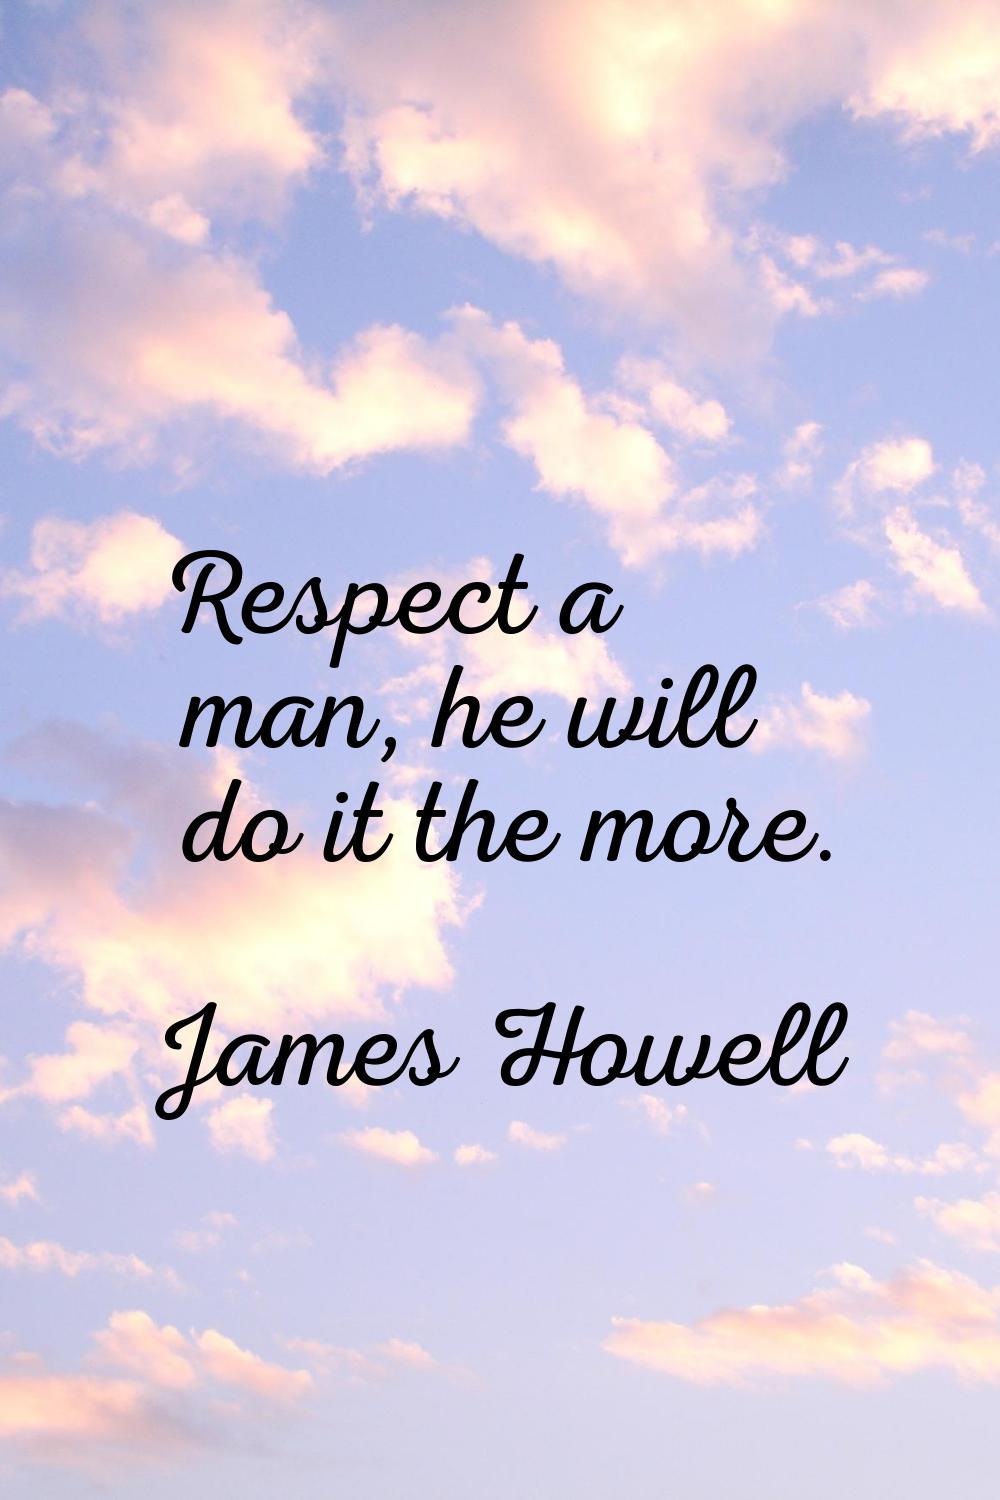 Respect a man, he will do it the more.